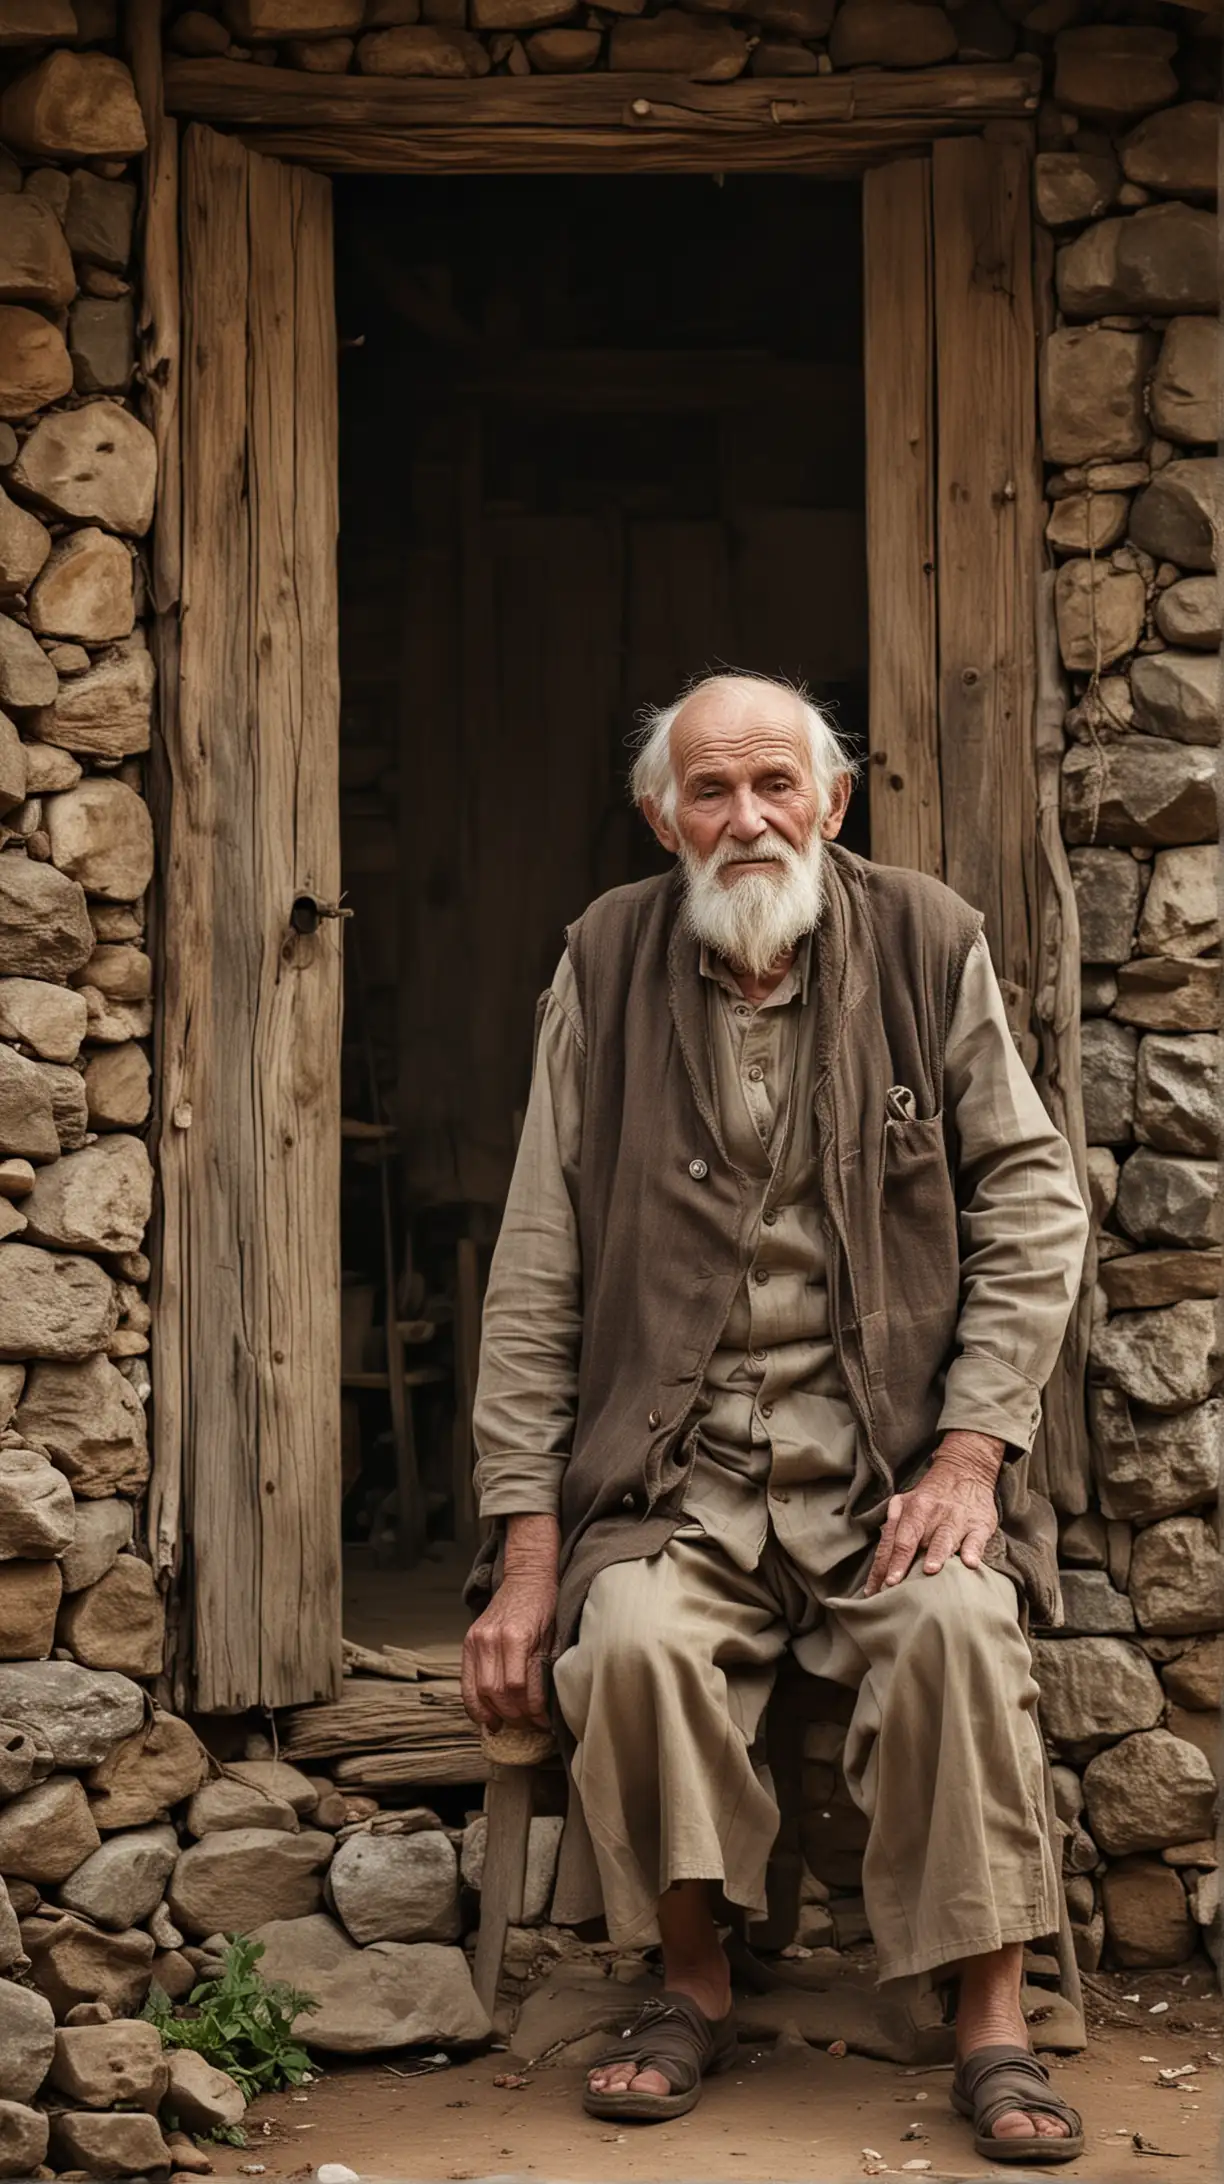 Once upon a time, a wise old man who lived in a remote village